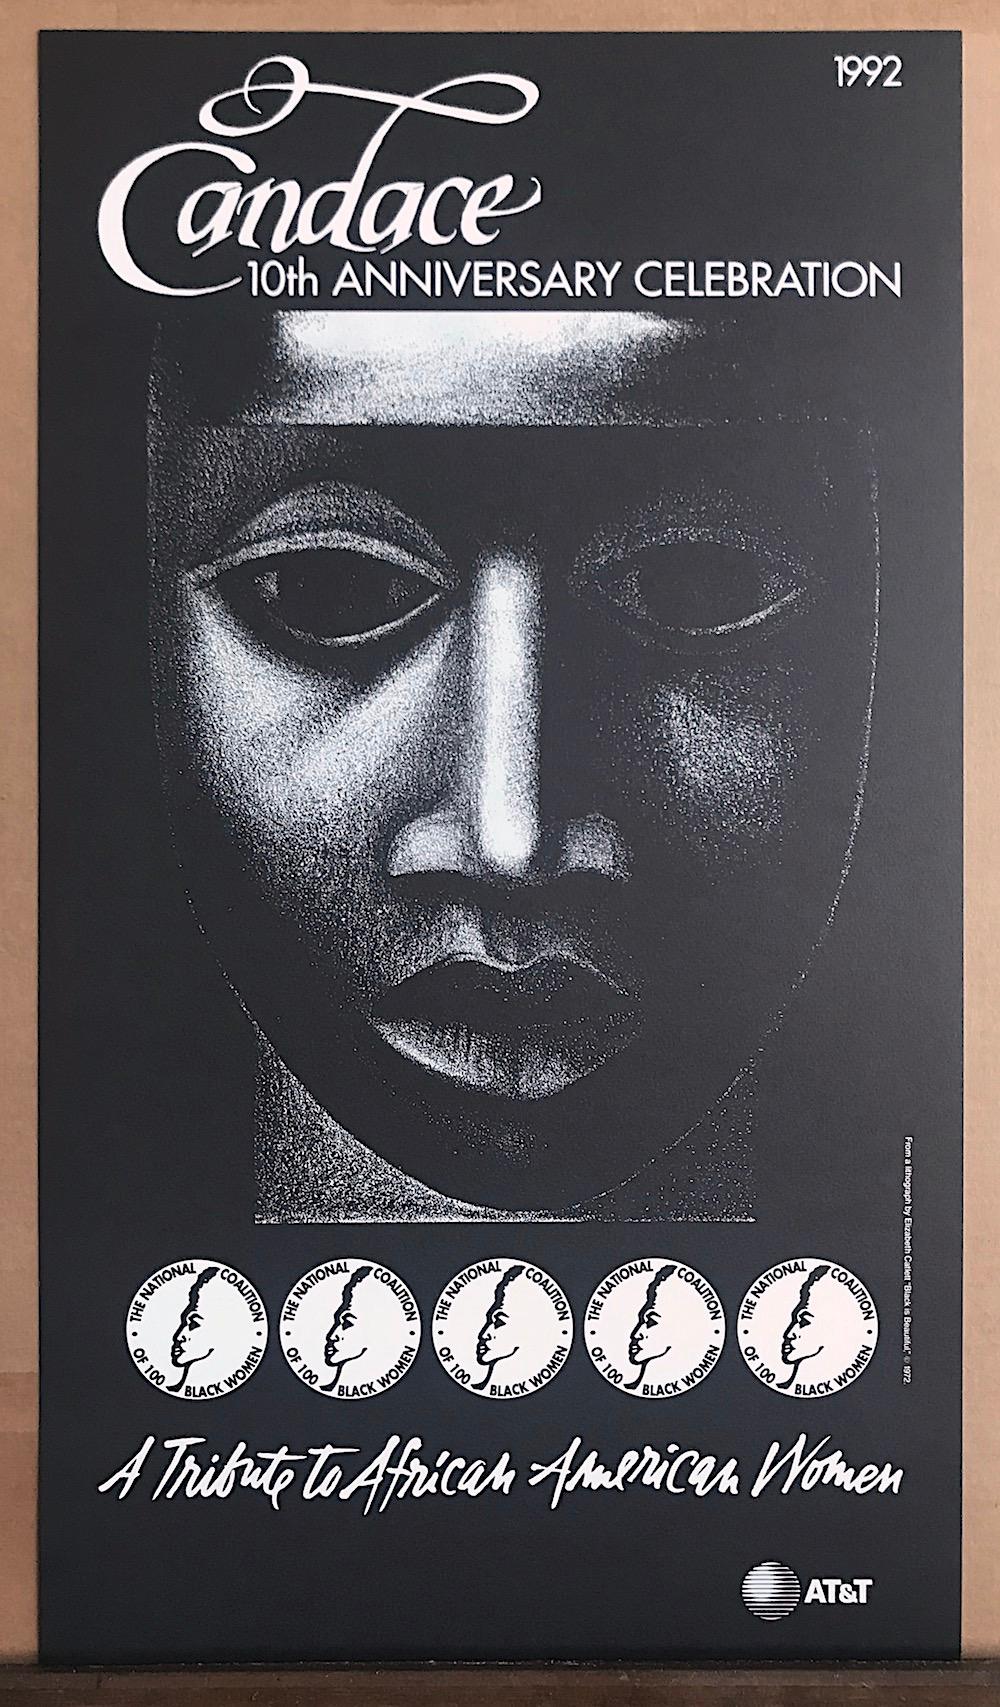 ELIZABETH CATLETT
Candace - 10th Anniversary Celebration 1992, A Tribute to African American Women
National Coalition of 100 Black Women, Commemorative Art Poster 

Year printed - 1992
Print size -  31.5 x 18 inches
Unsigned

CANDACE is a specially